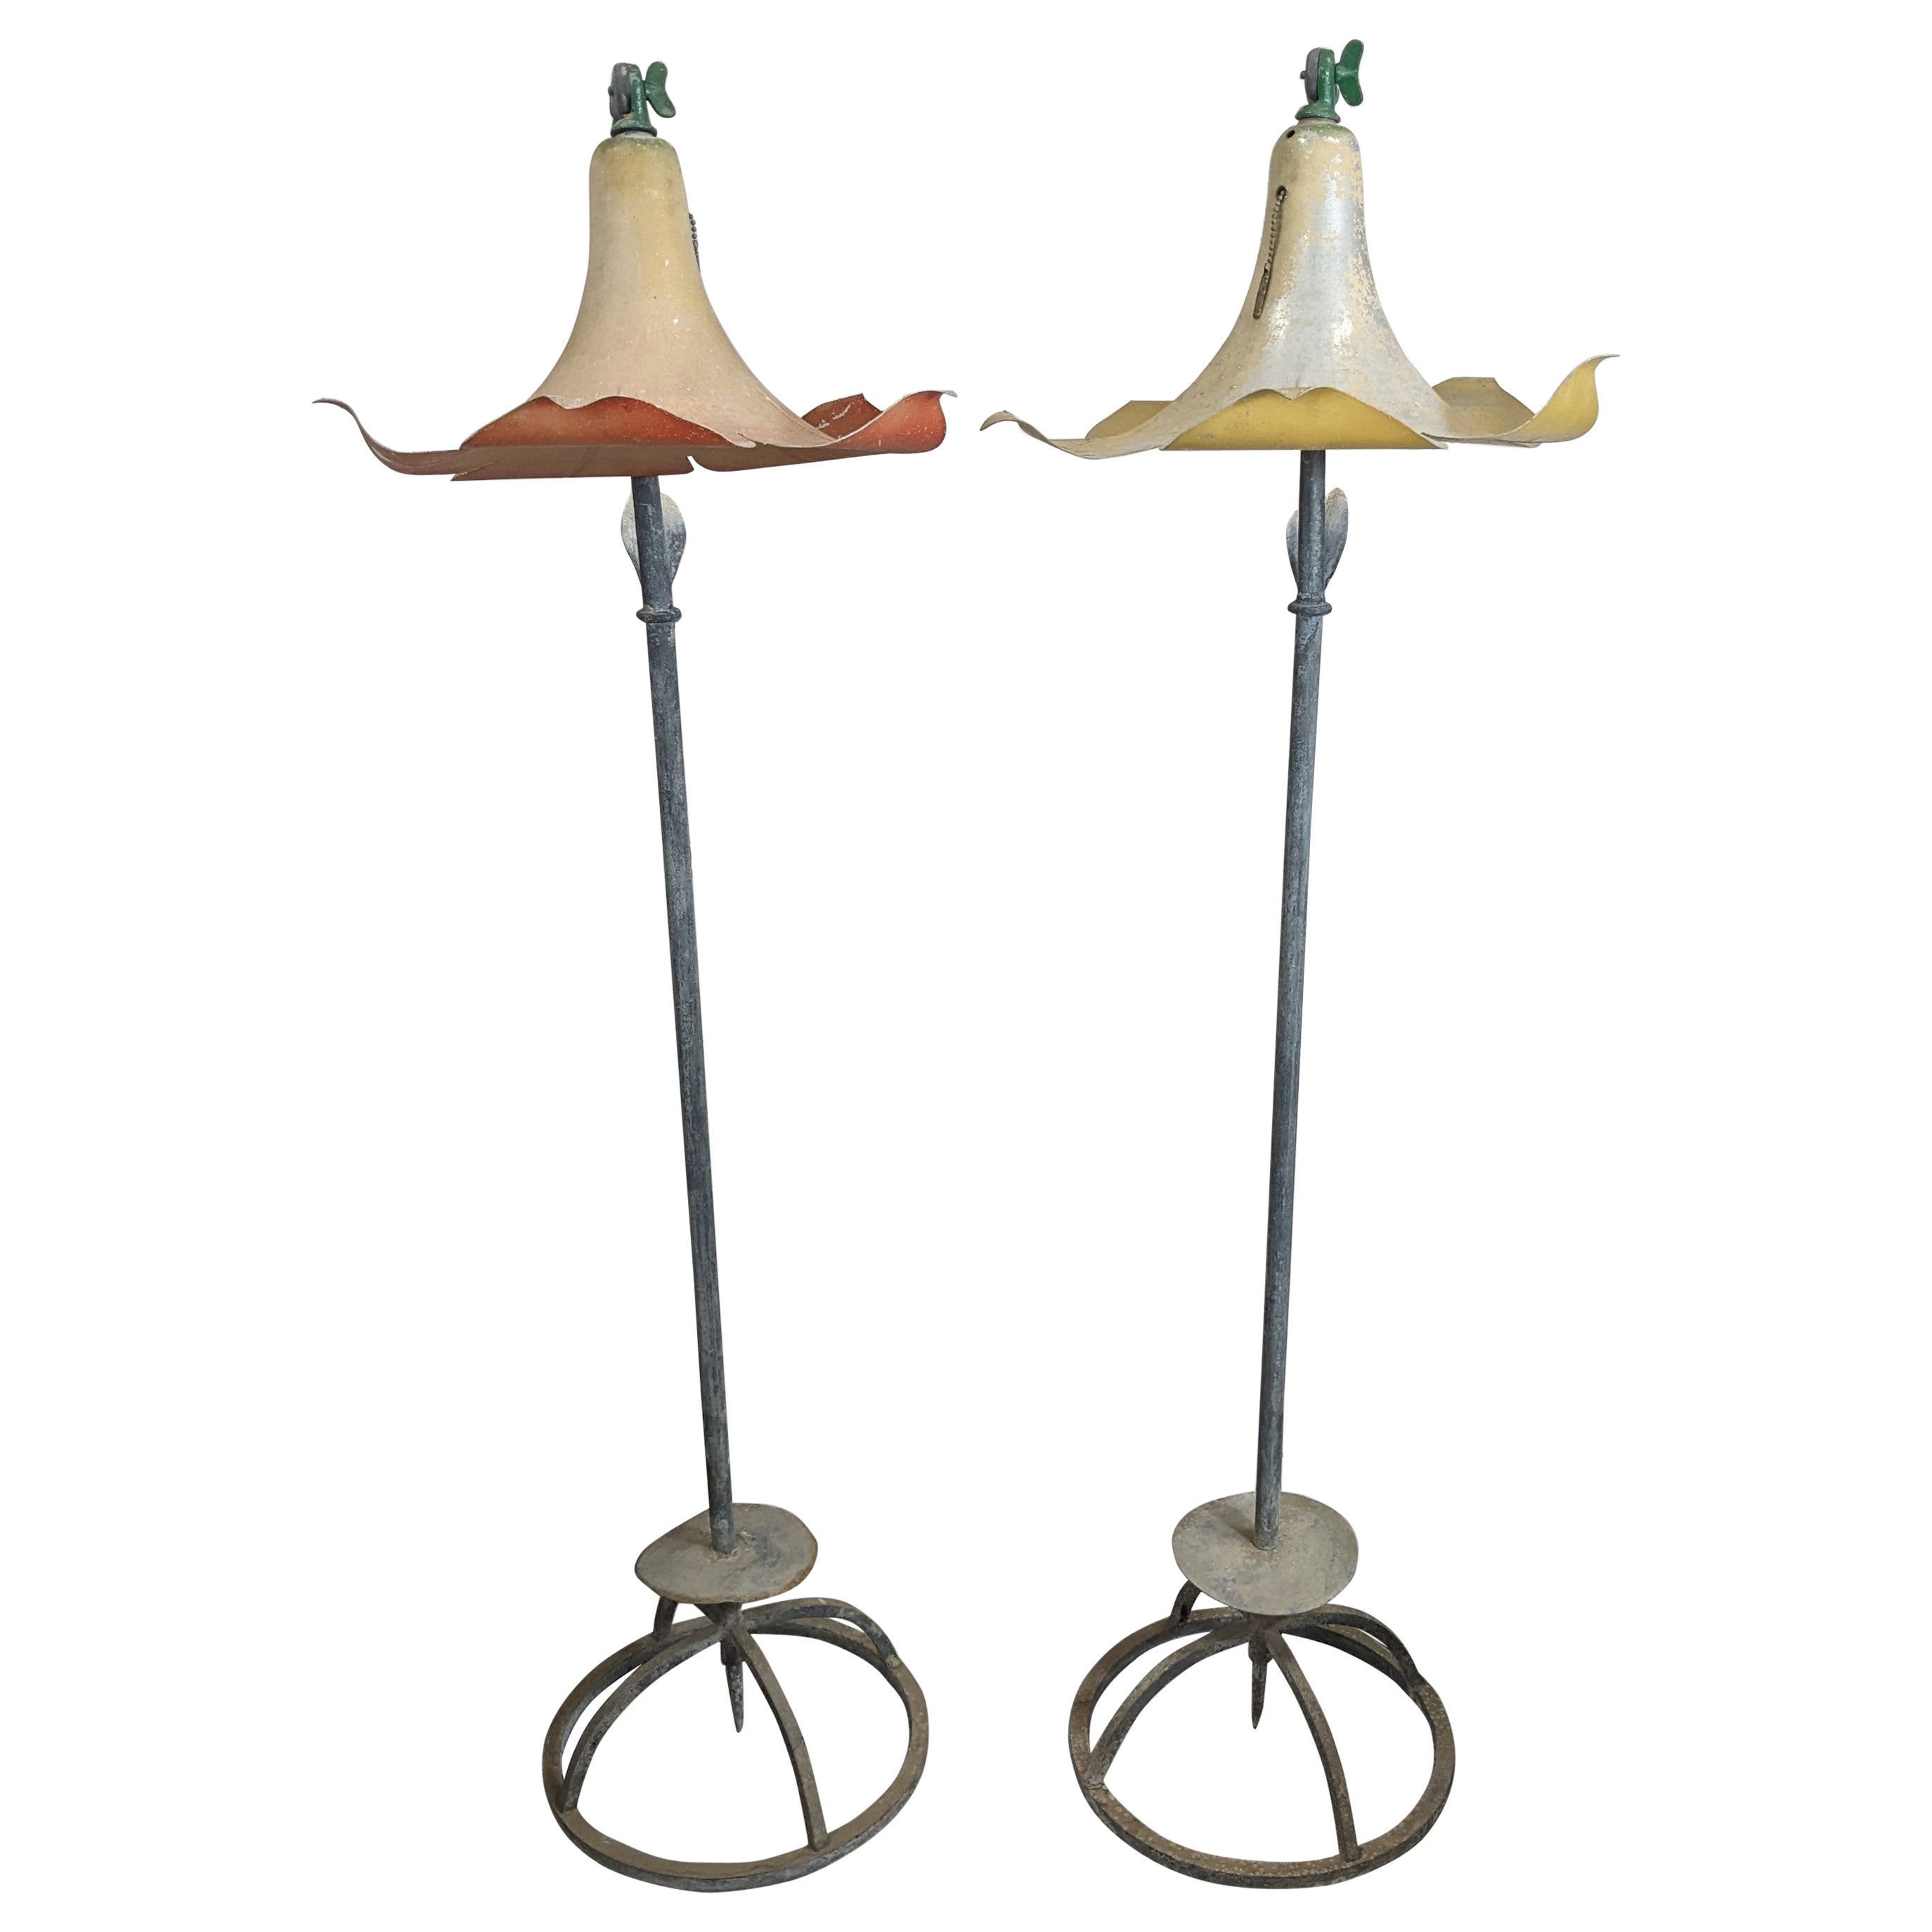 Pair of Charming Art Deco Morning Glory Garden Lamps For Sale